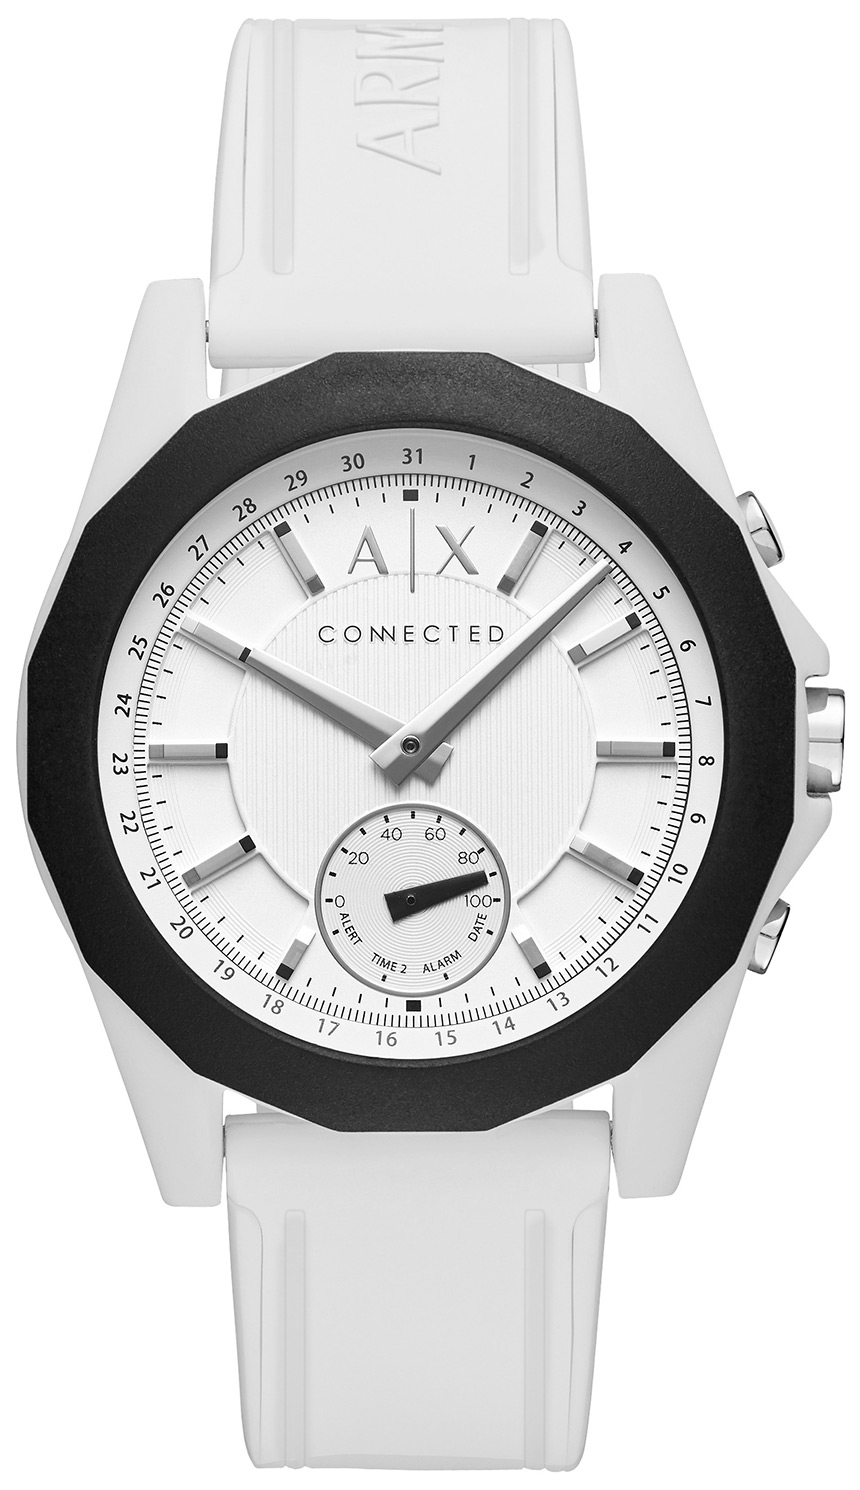 armani-exchange-ax-connected-smart-watch-3